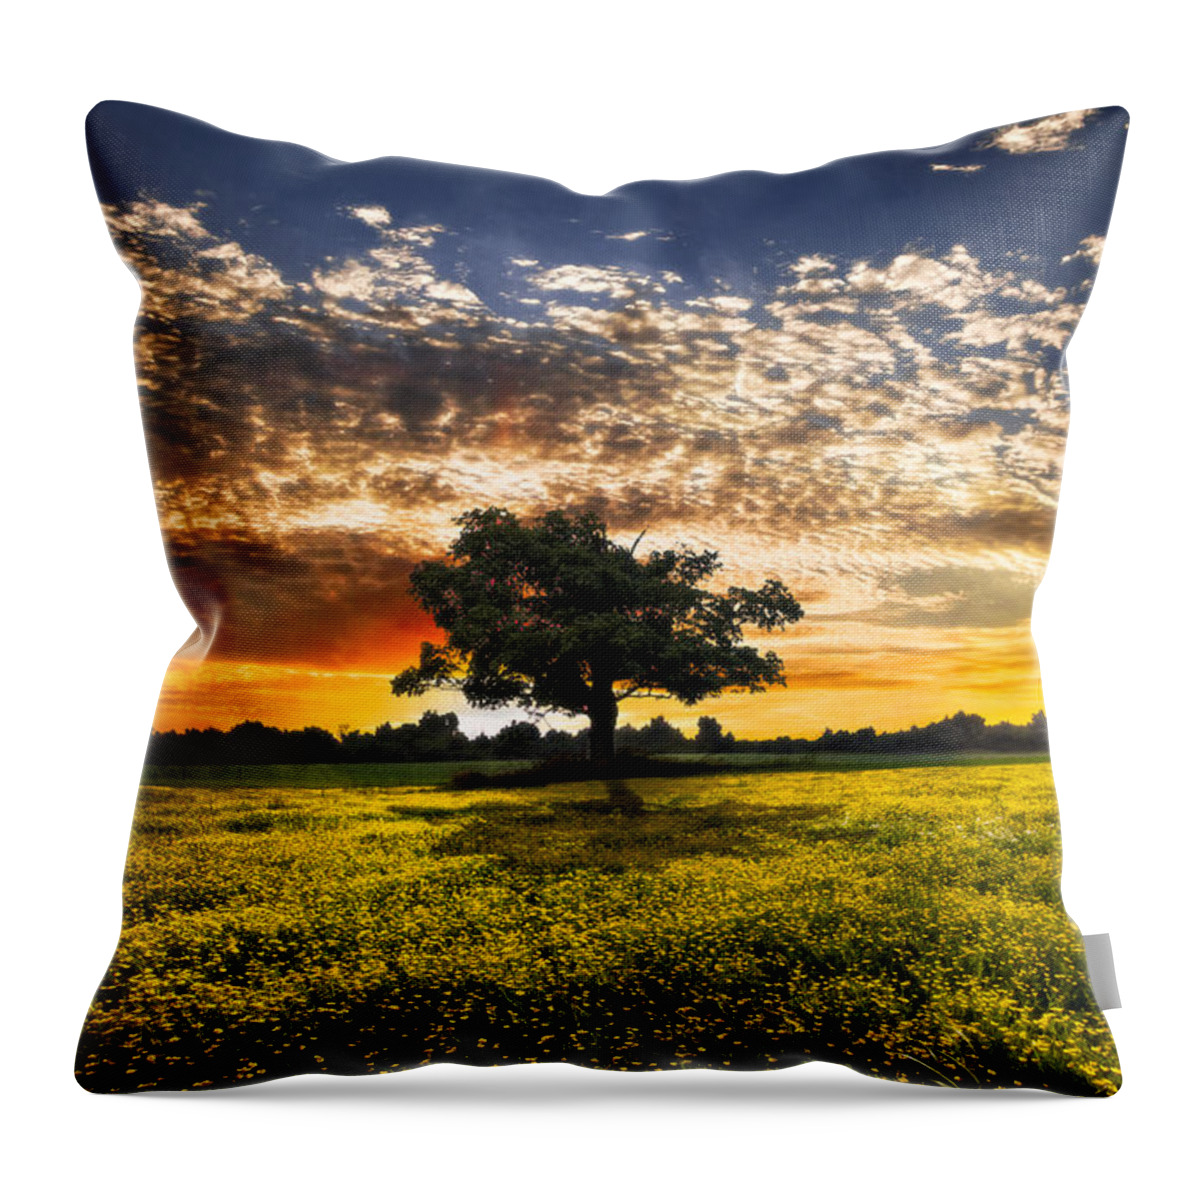 Barns Throw Pillow featuring the photograph Shadows At Sunset by Debra and Dave Vanderlaan